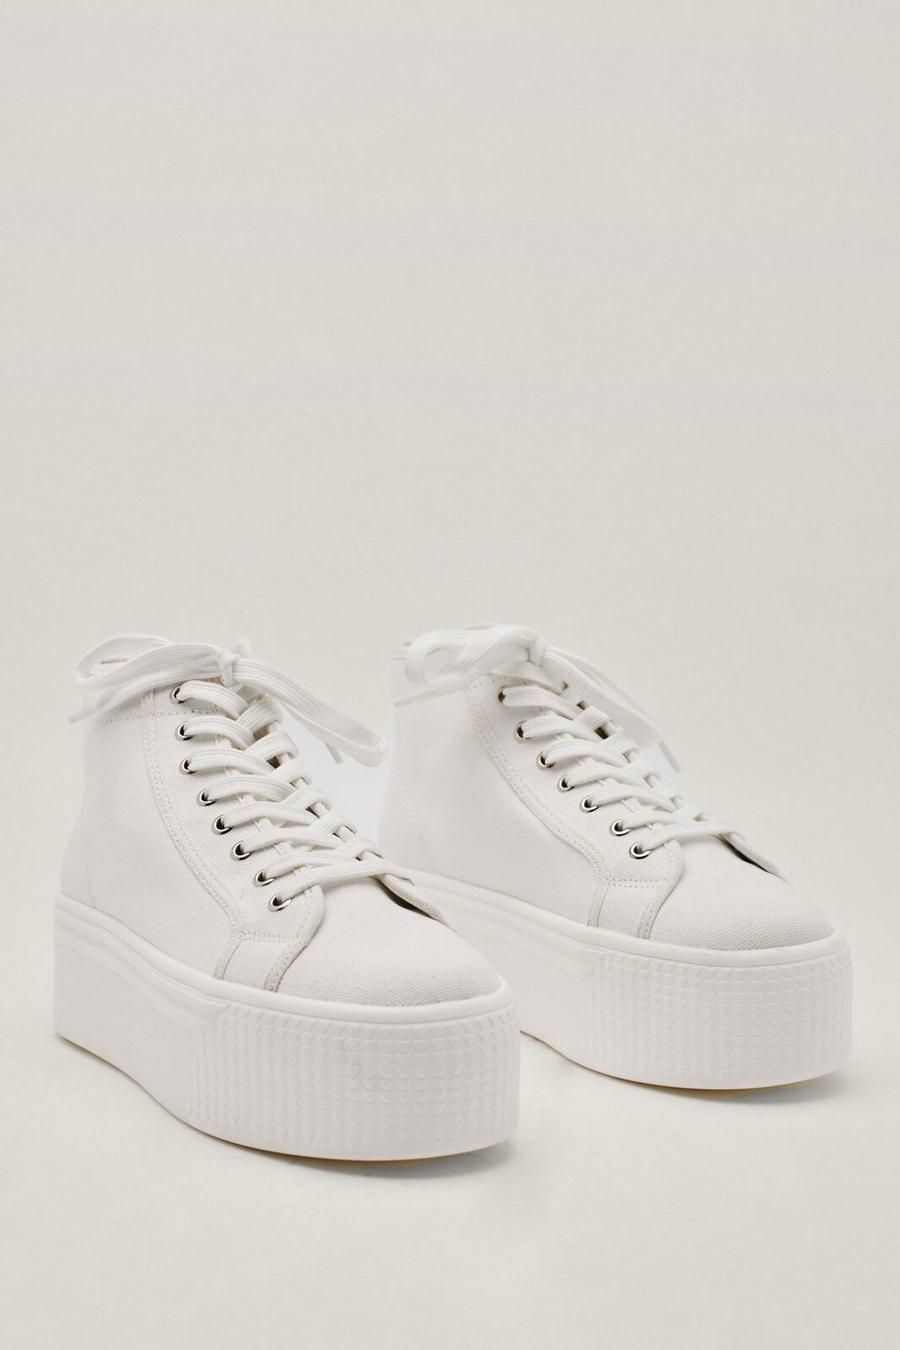 High Top Flatform Lace Up Canvas Sneakers